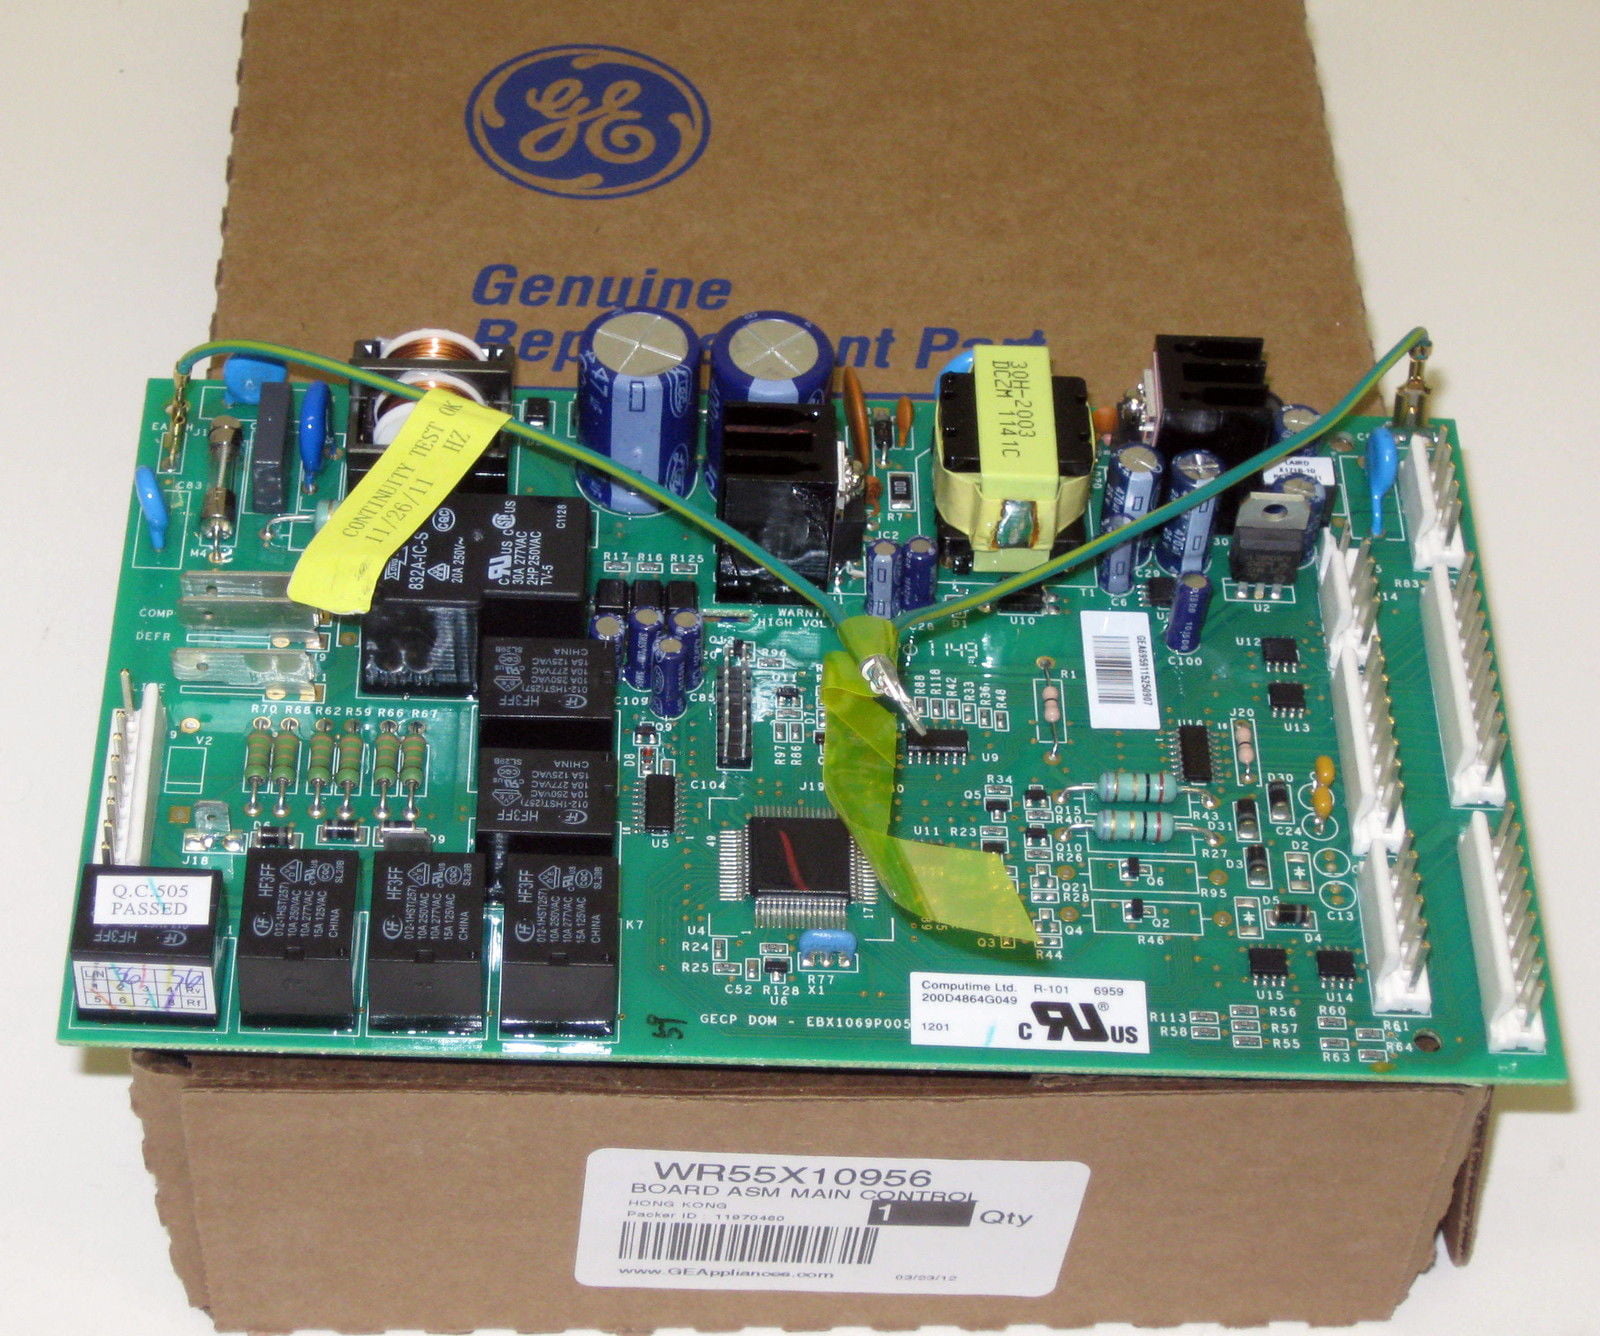 GE WR55X10956 Genuine OEM Main Control Board Assembly for GE ...